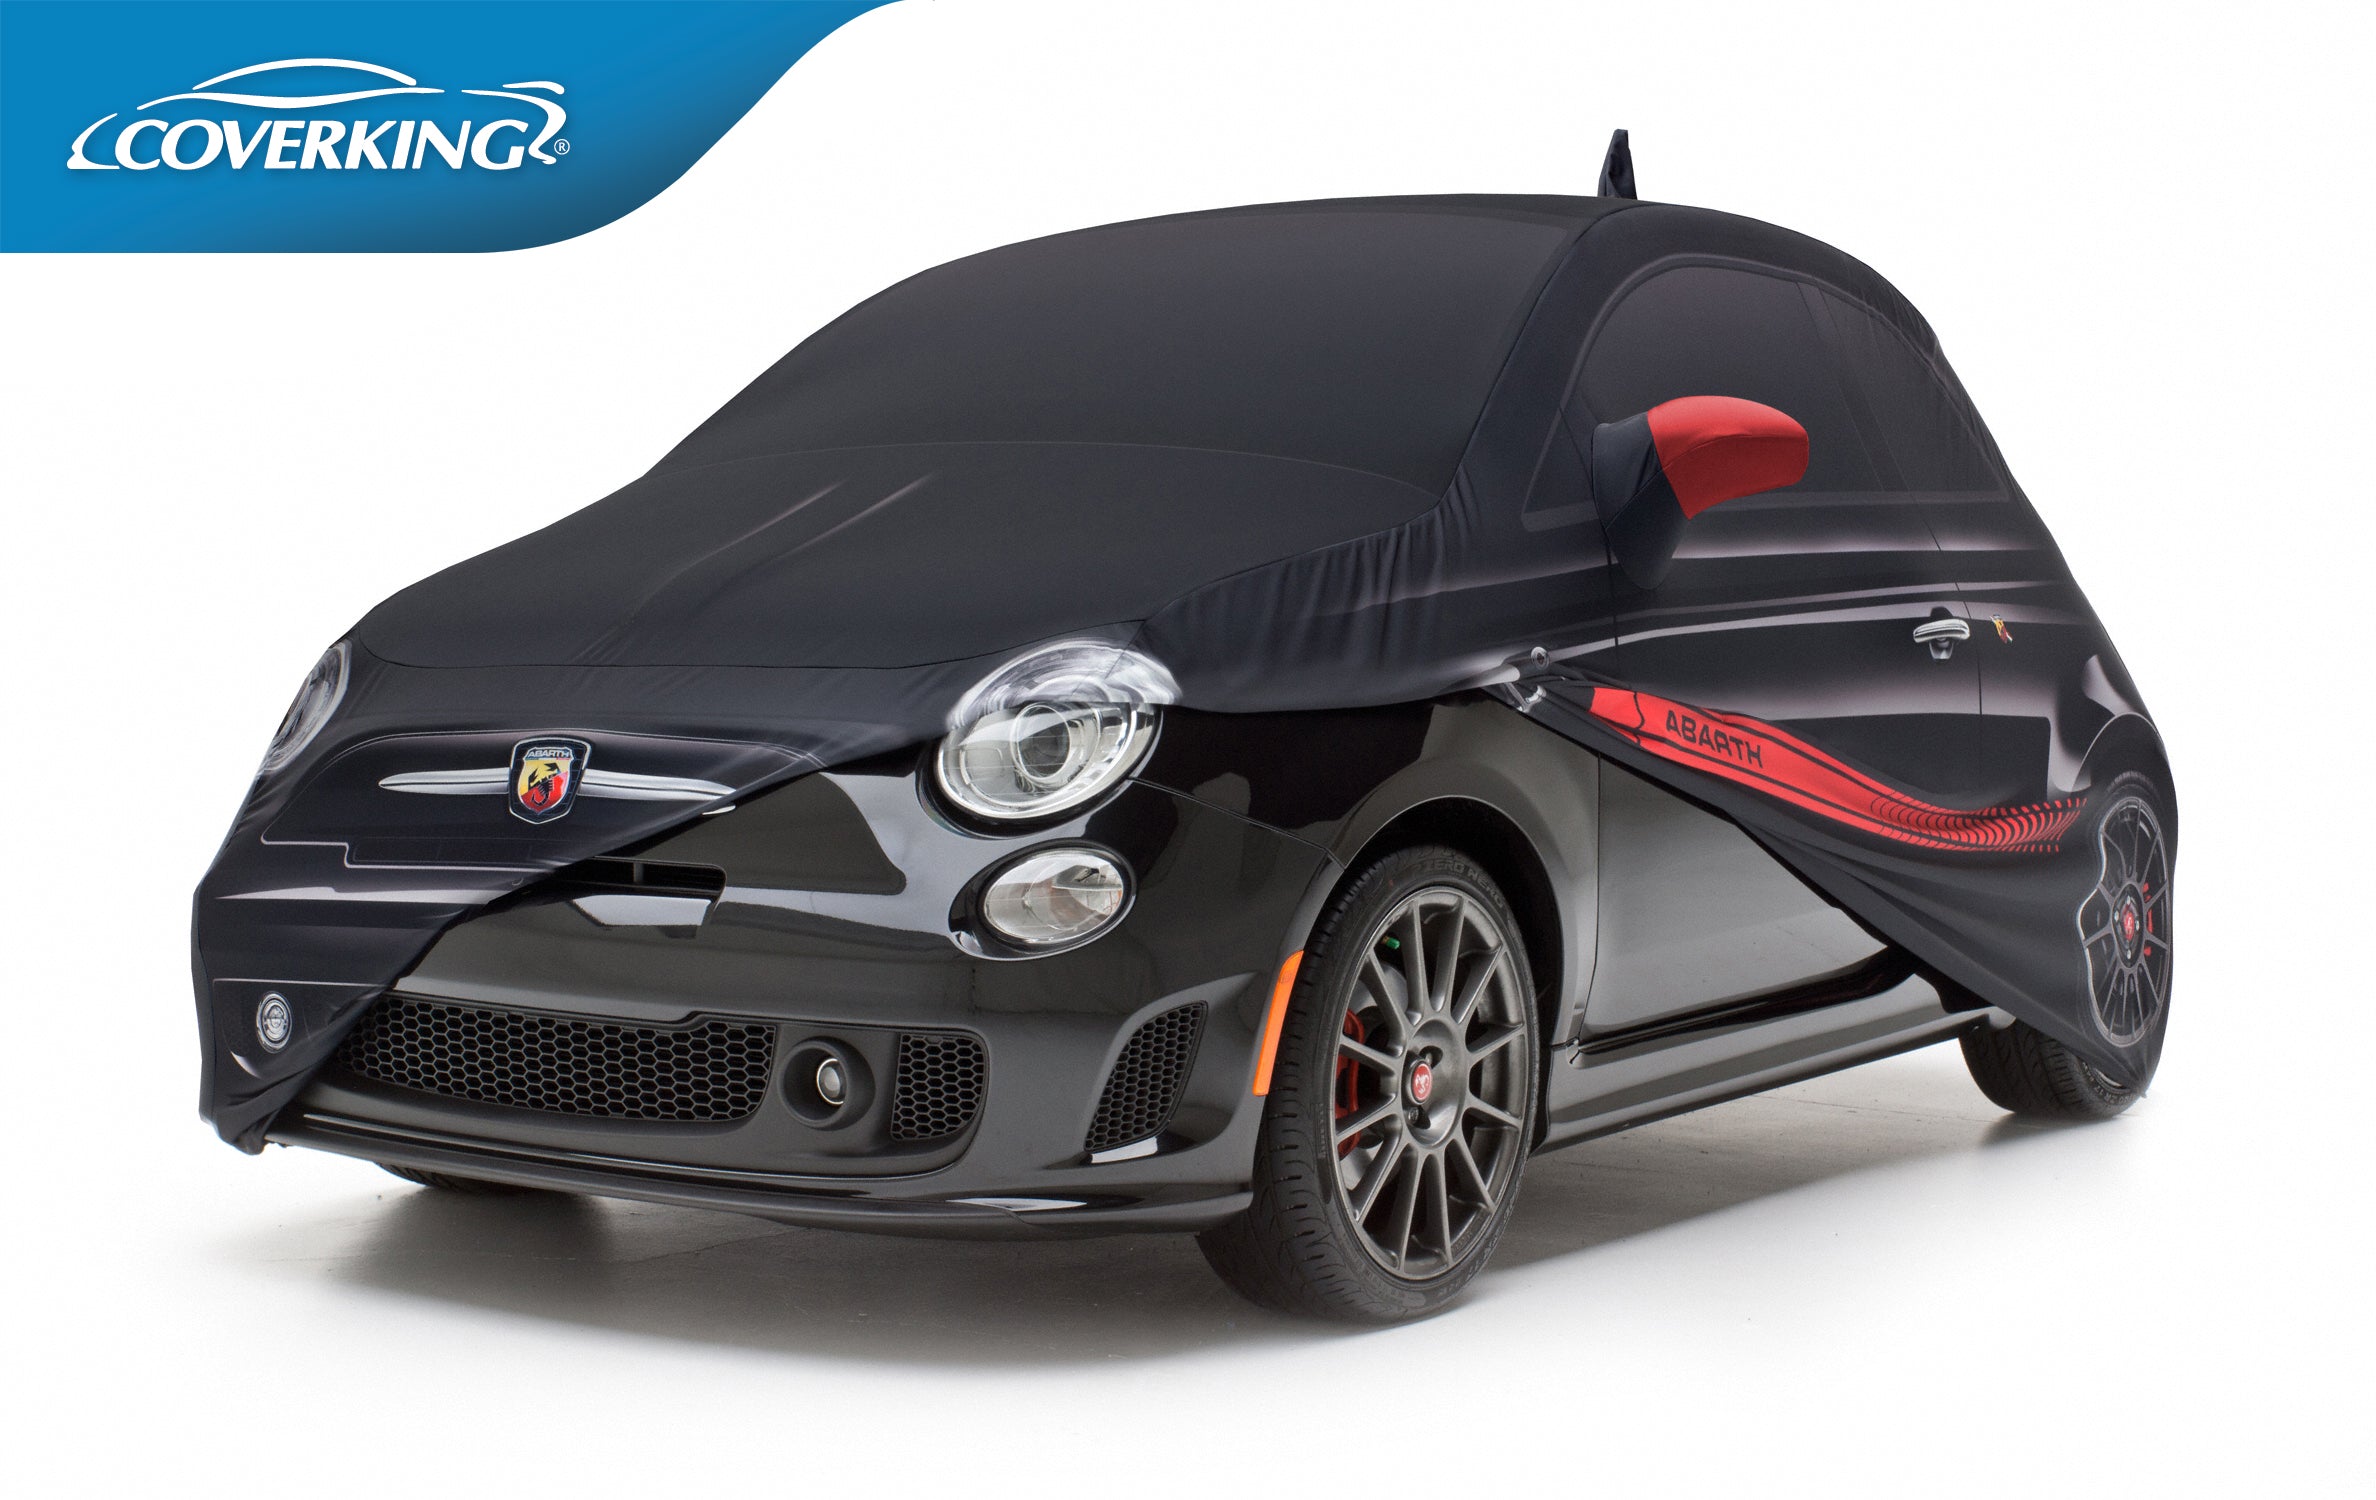 Outdoor Car Cover for Abarth. Waterproof Tailored Car Cover